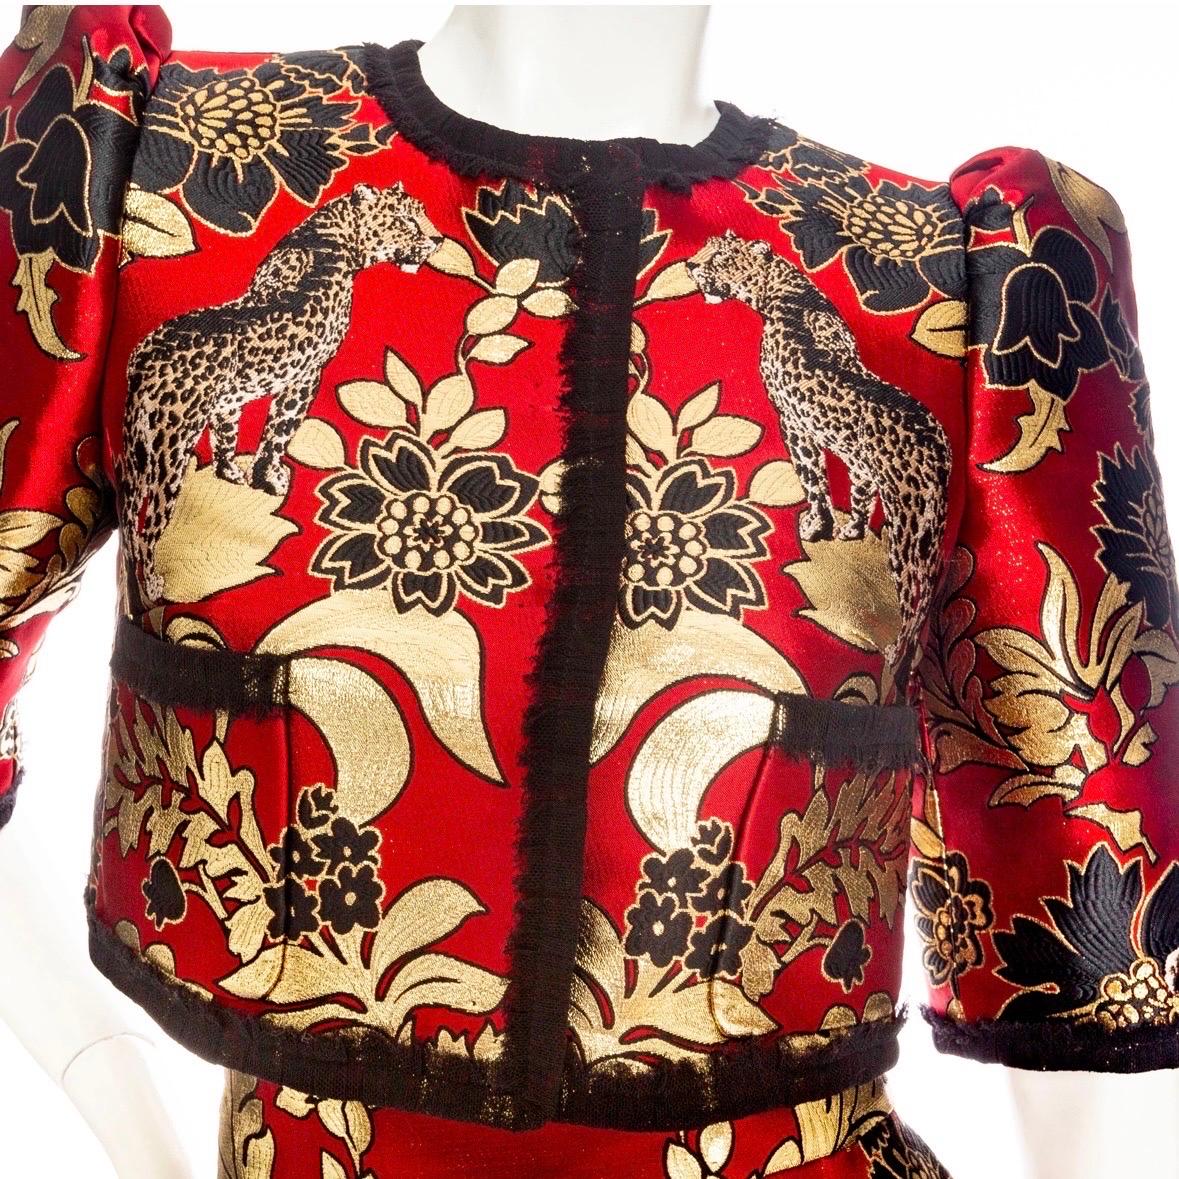 Dolce & Gabbana Gold and Red Leopard Motif Jacquard Jacket and Skirt Set For Sale 1